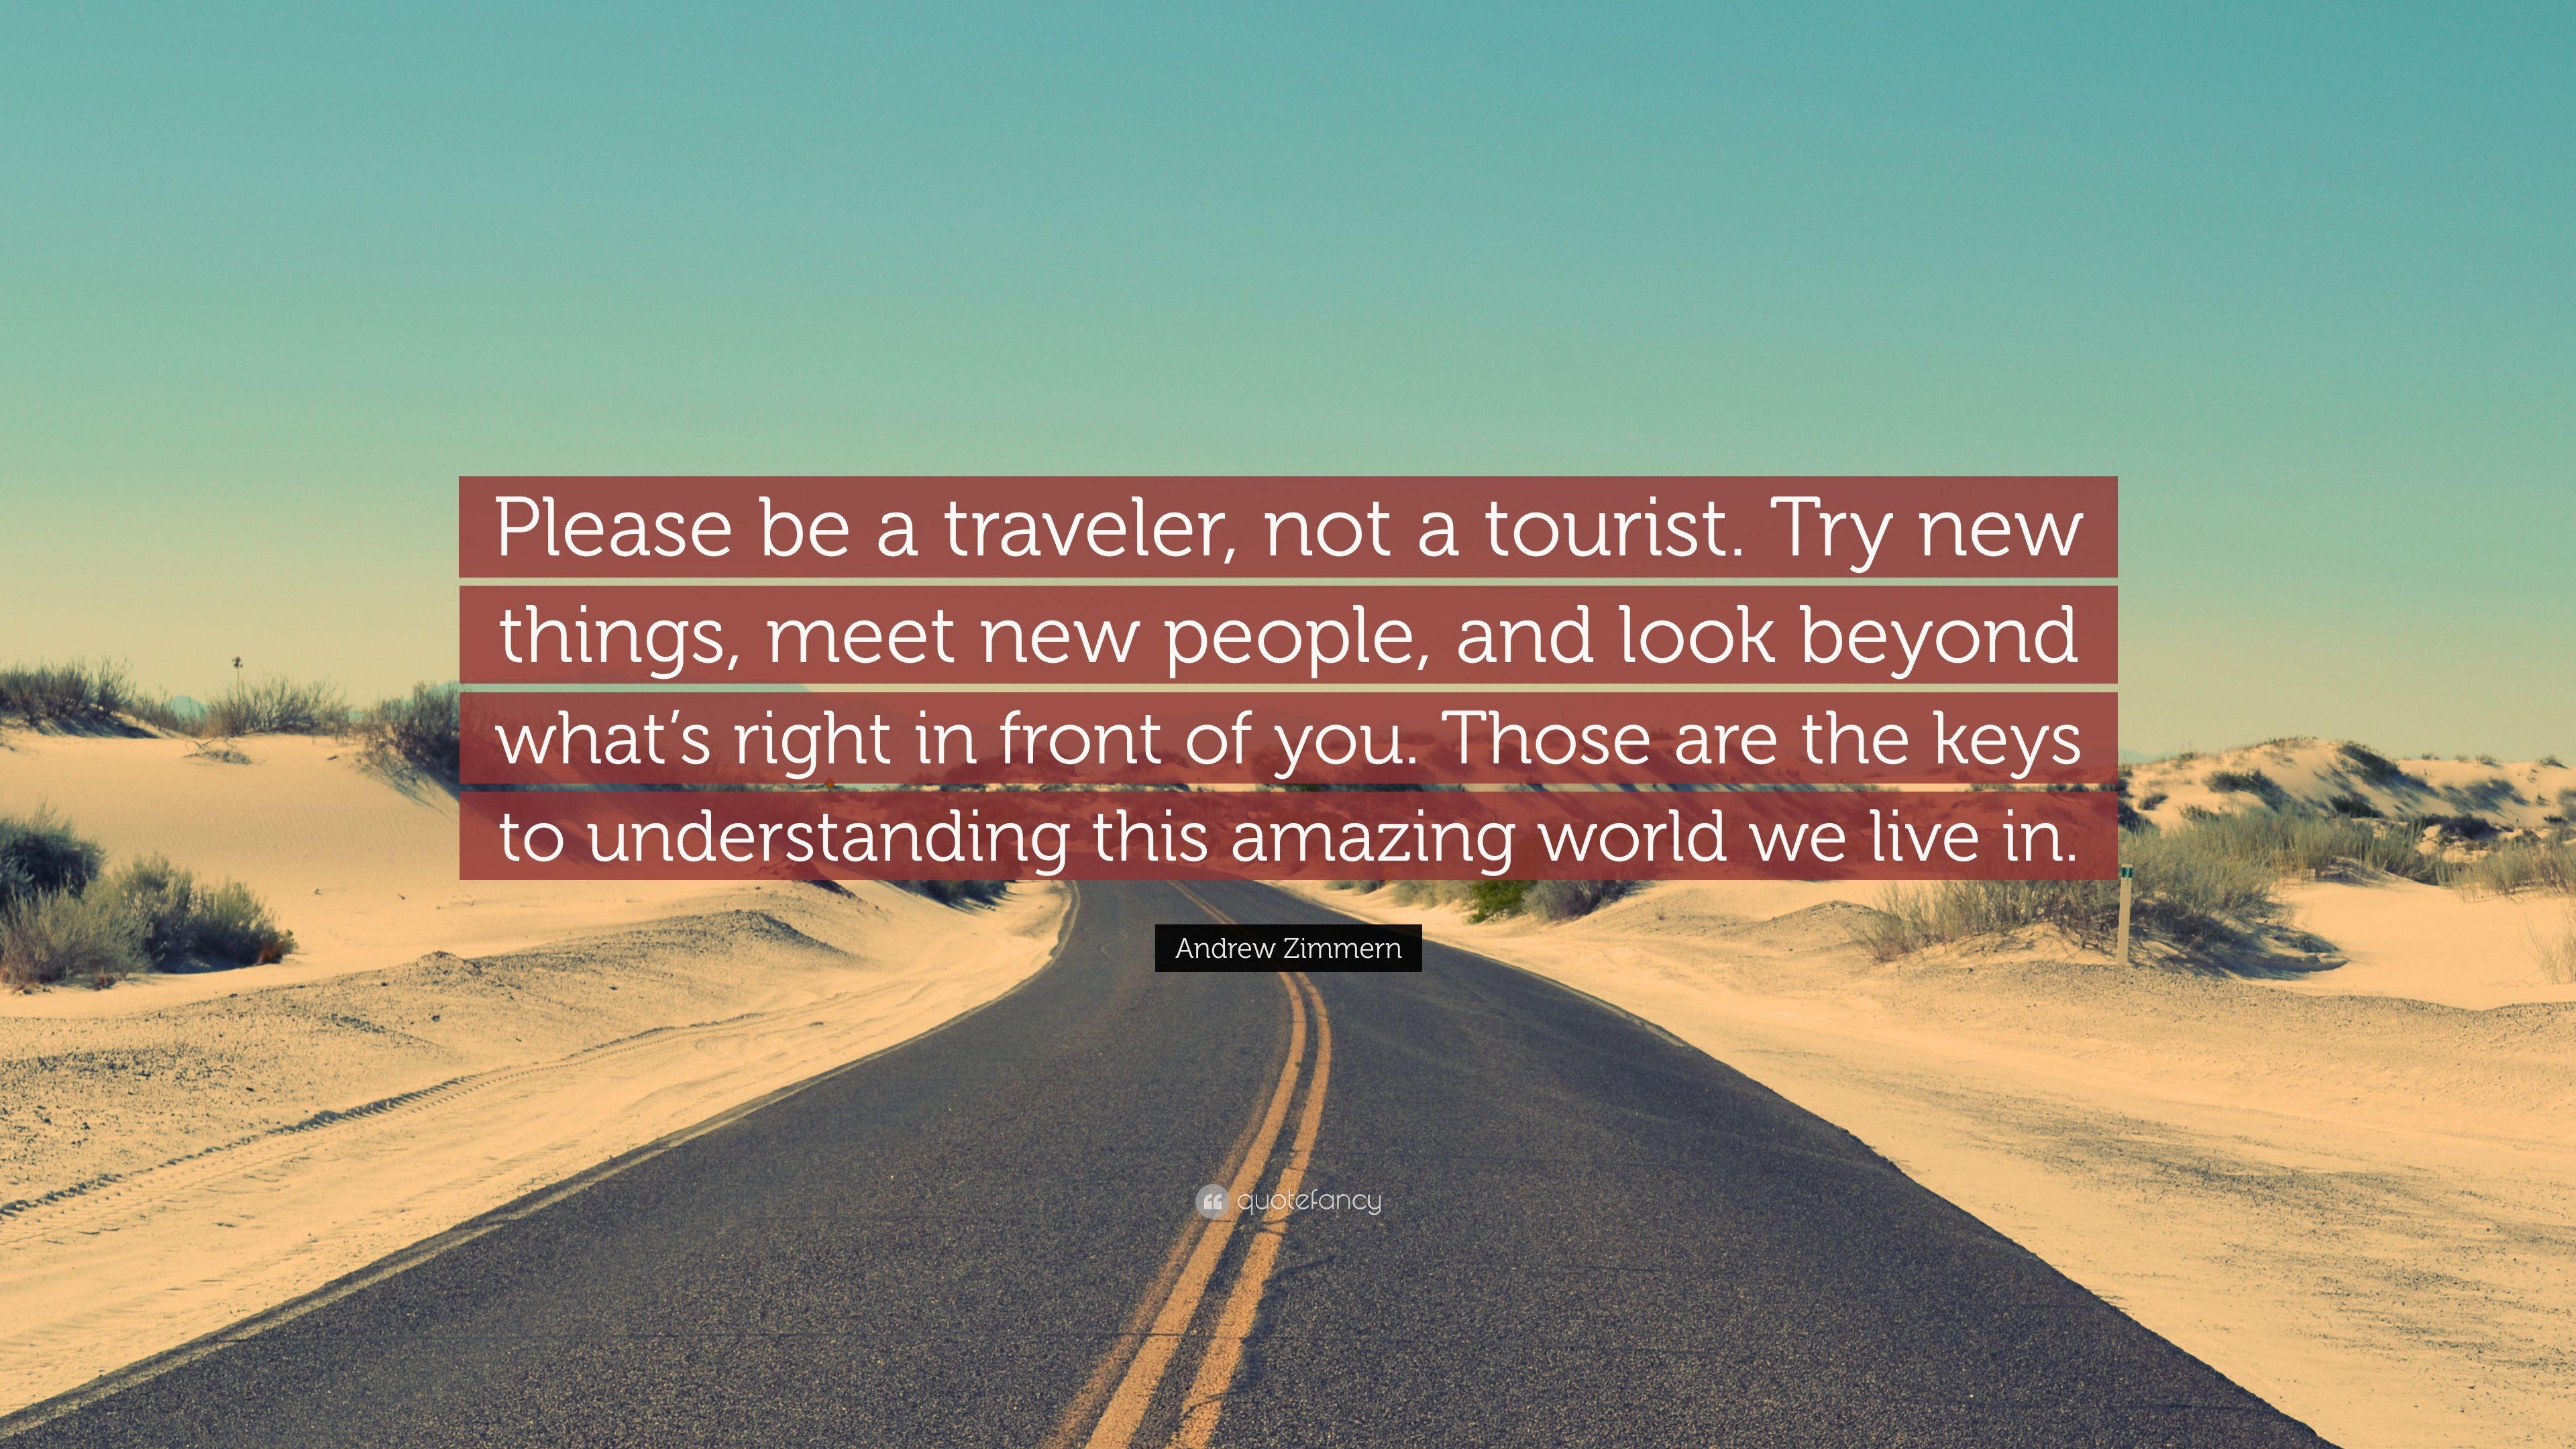 Andrew Zimmern Quote: “Please be a traveler, not a tourist. Try new